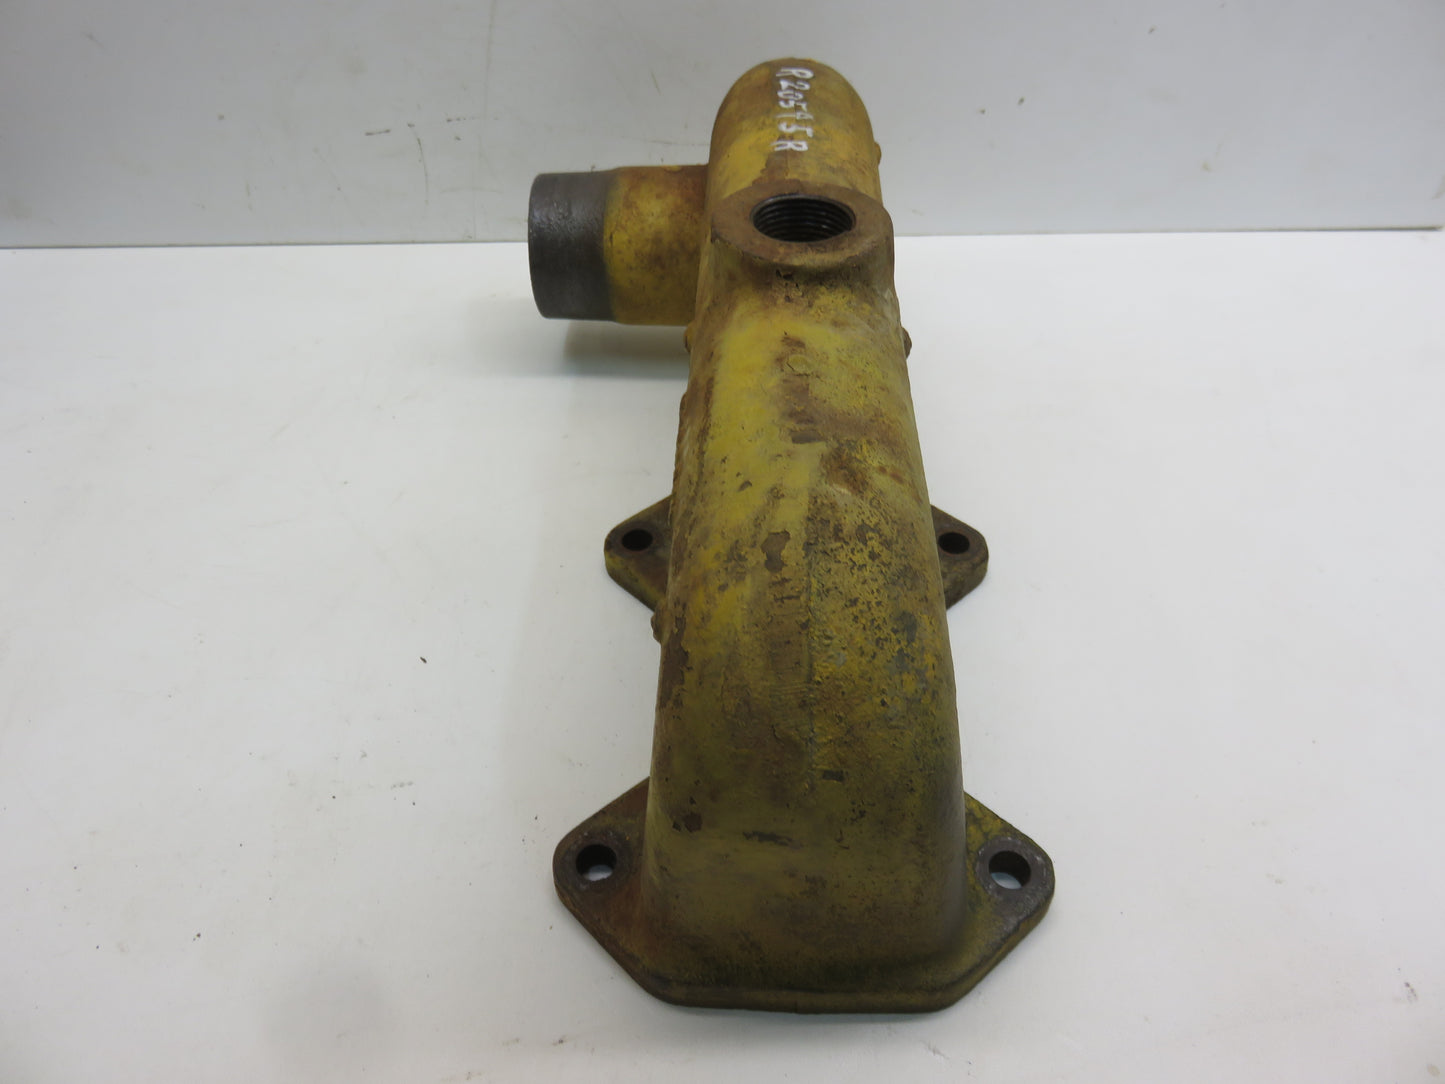 R20595R John Deere Lower Cylinder Head Water Inlet For 830, 840